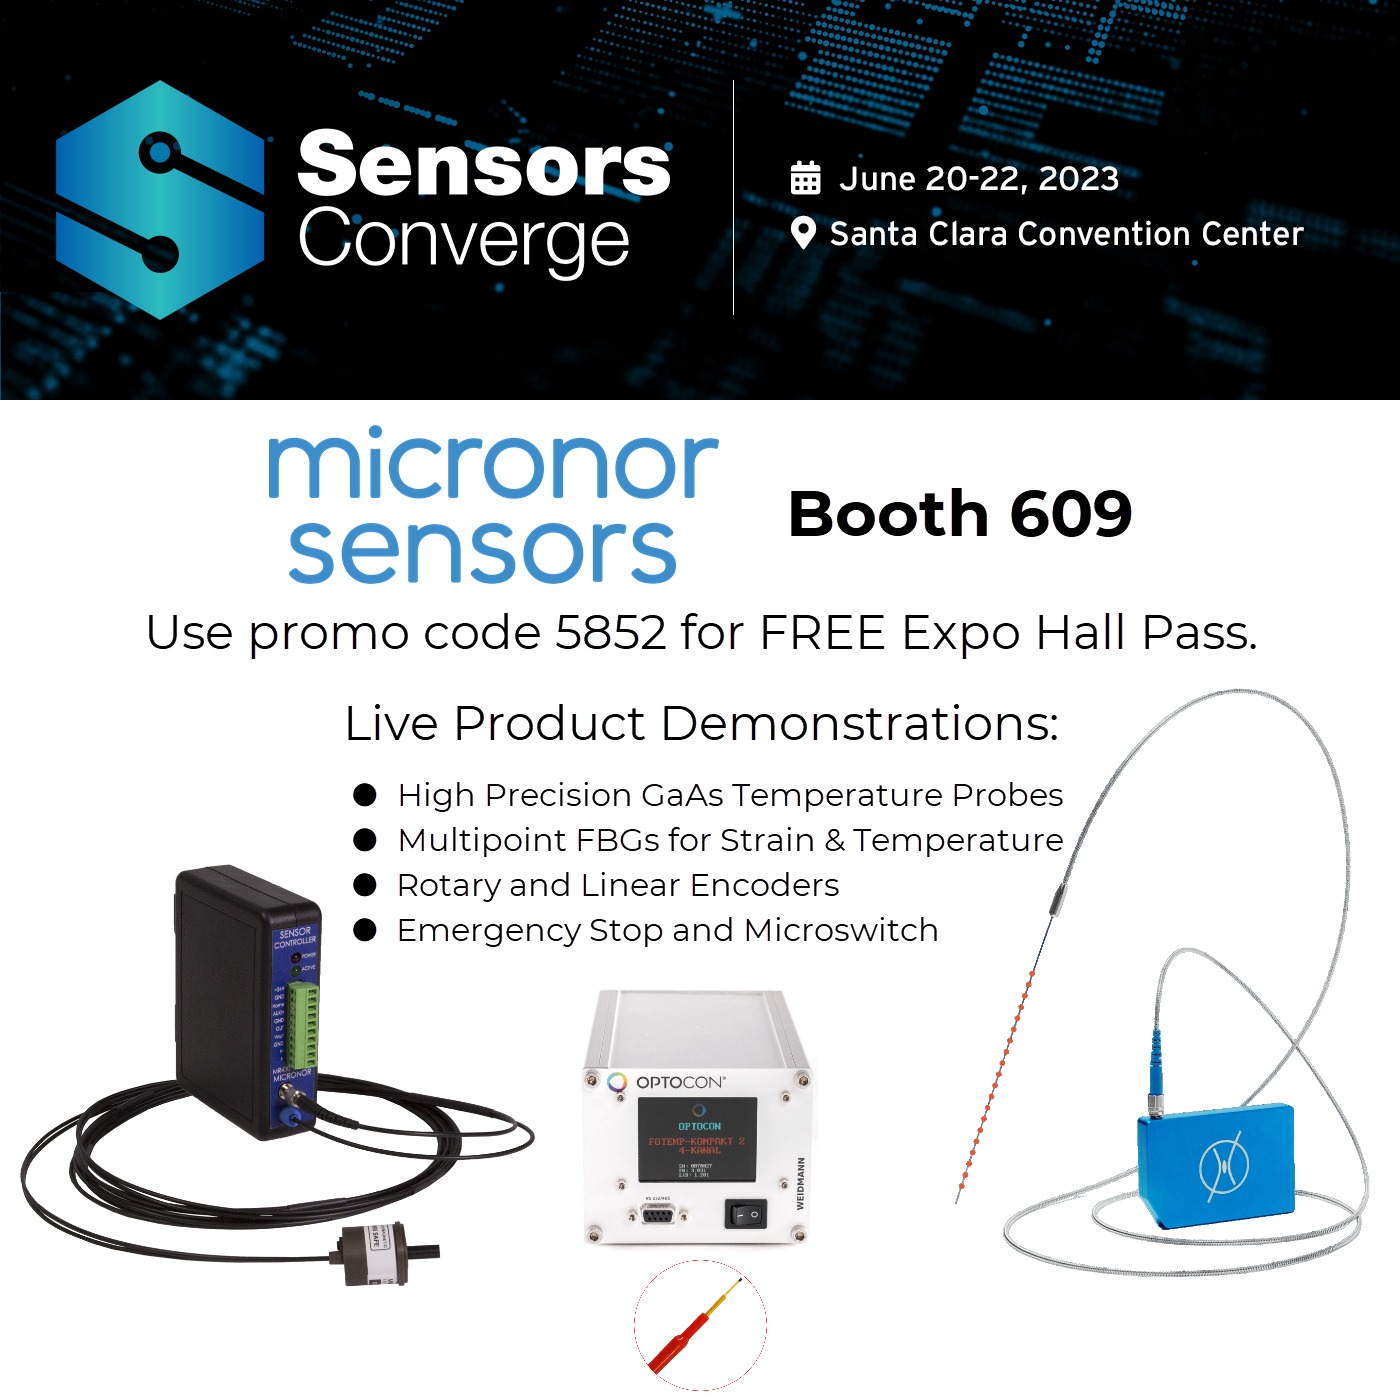 Micronor booth at Sensors Converge 2023 offers live FO sensor demonstrations